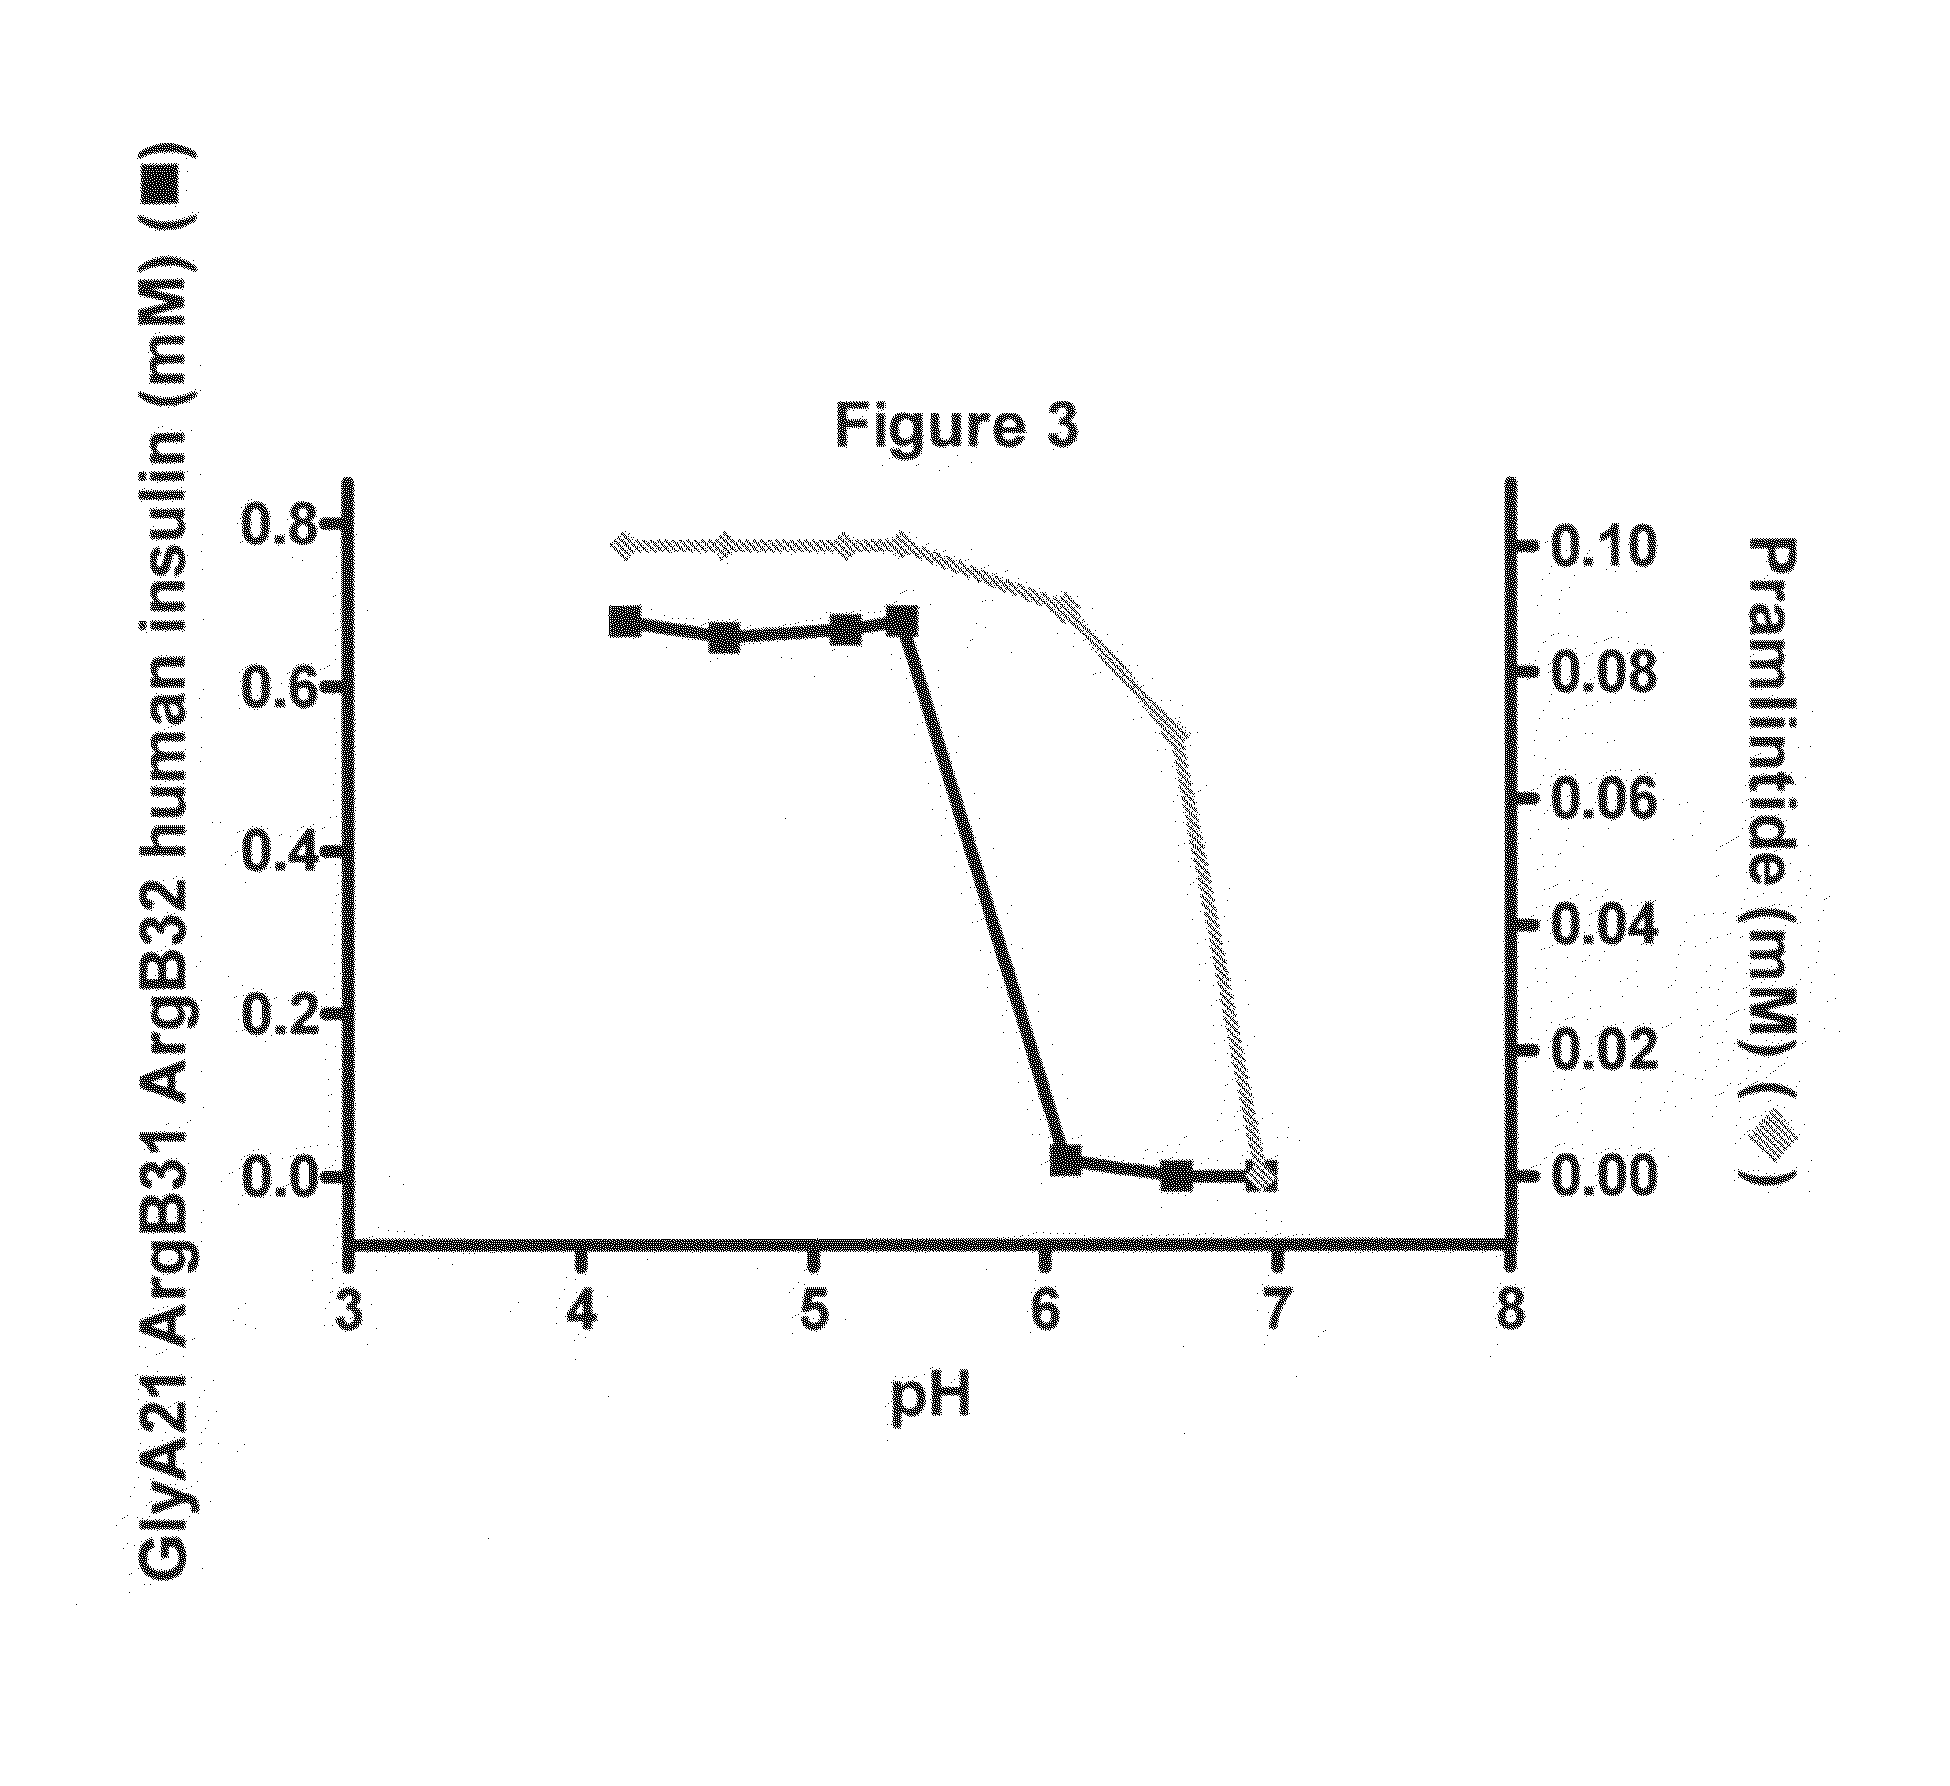 Mixture comprising an amylin peptide and a protracted insulin